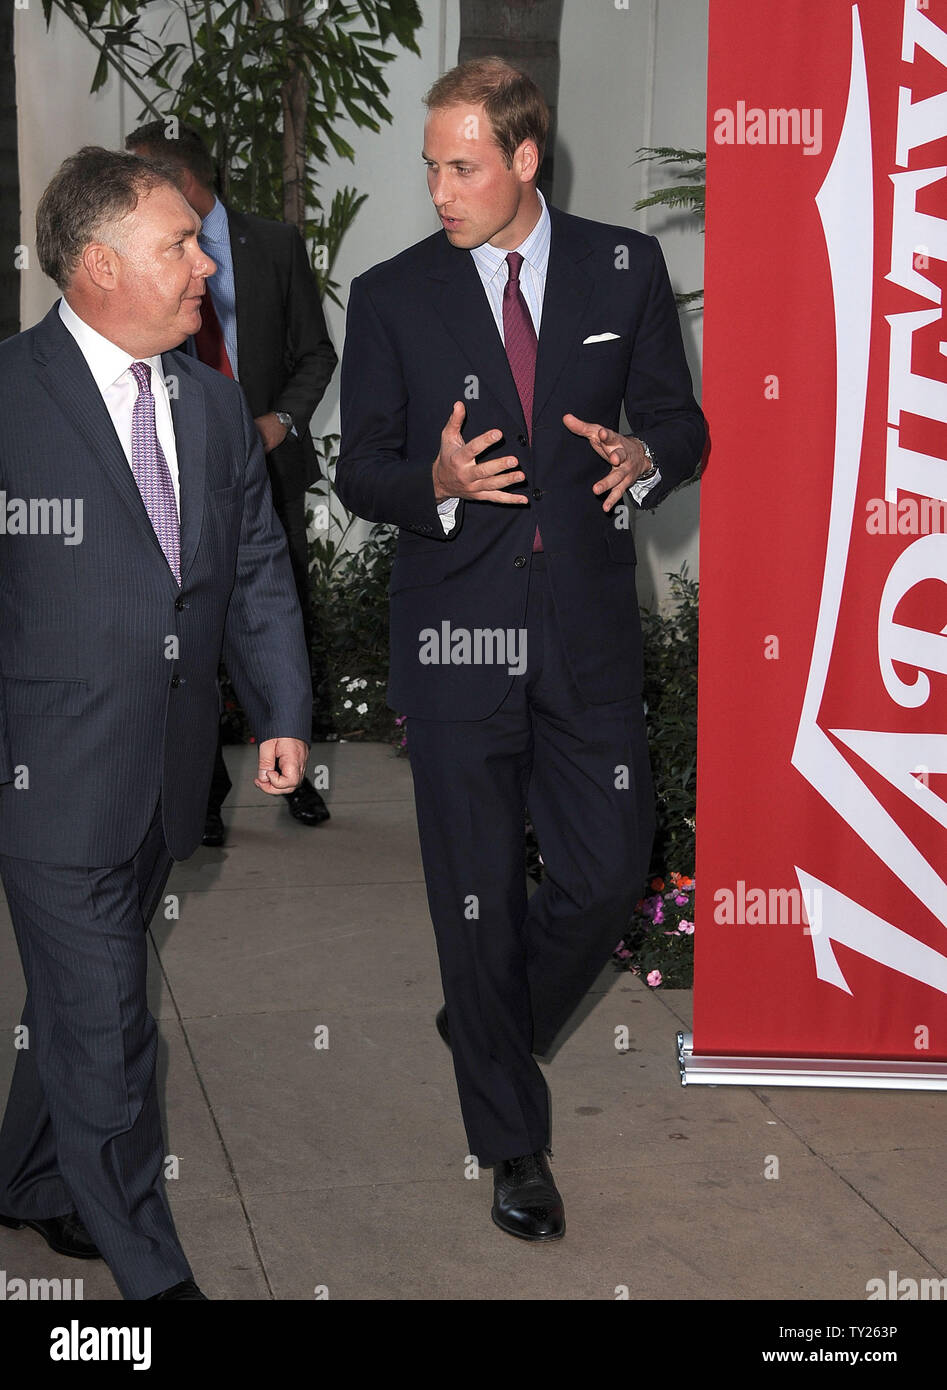 Prince William, Duke of Cambridge arrives for Variety's Venture Capital and New Media Summit in Beverly Hills on July 8, 2011. The newly married Royal Couple are on a three-day visit to Southern California.  UPI/Steve Granitz Stock Photo